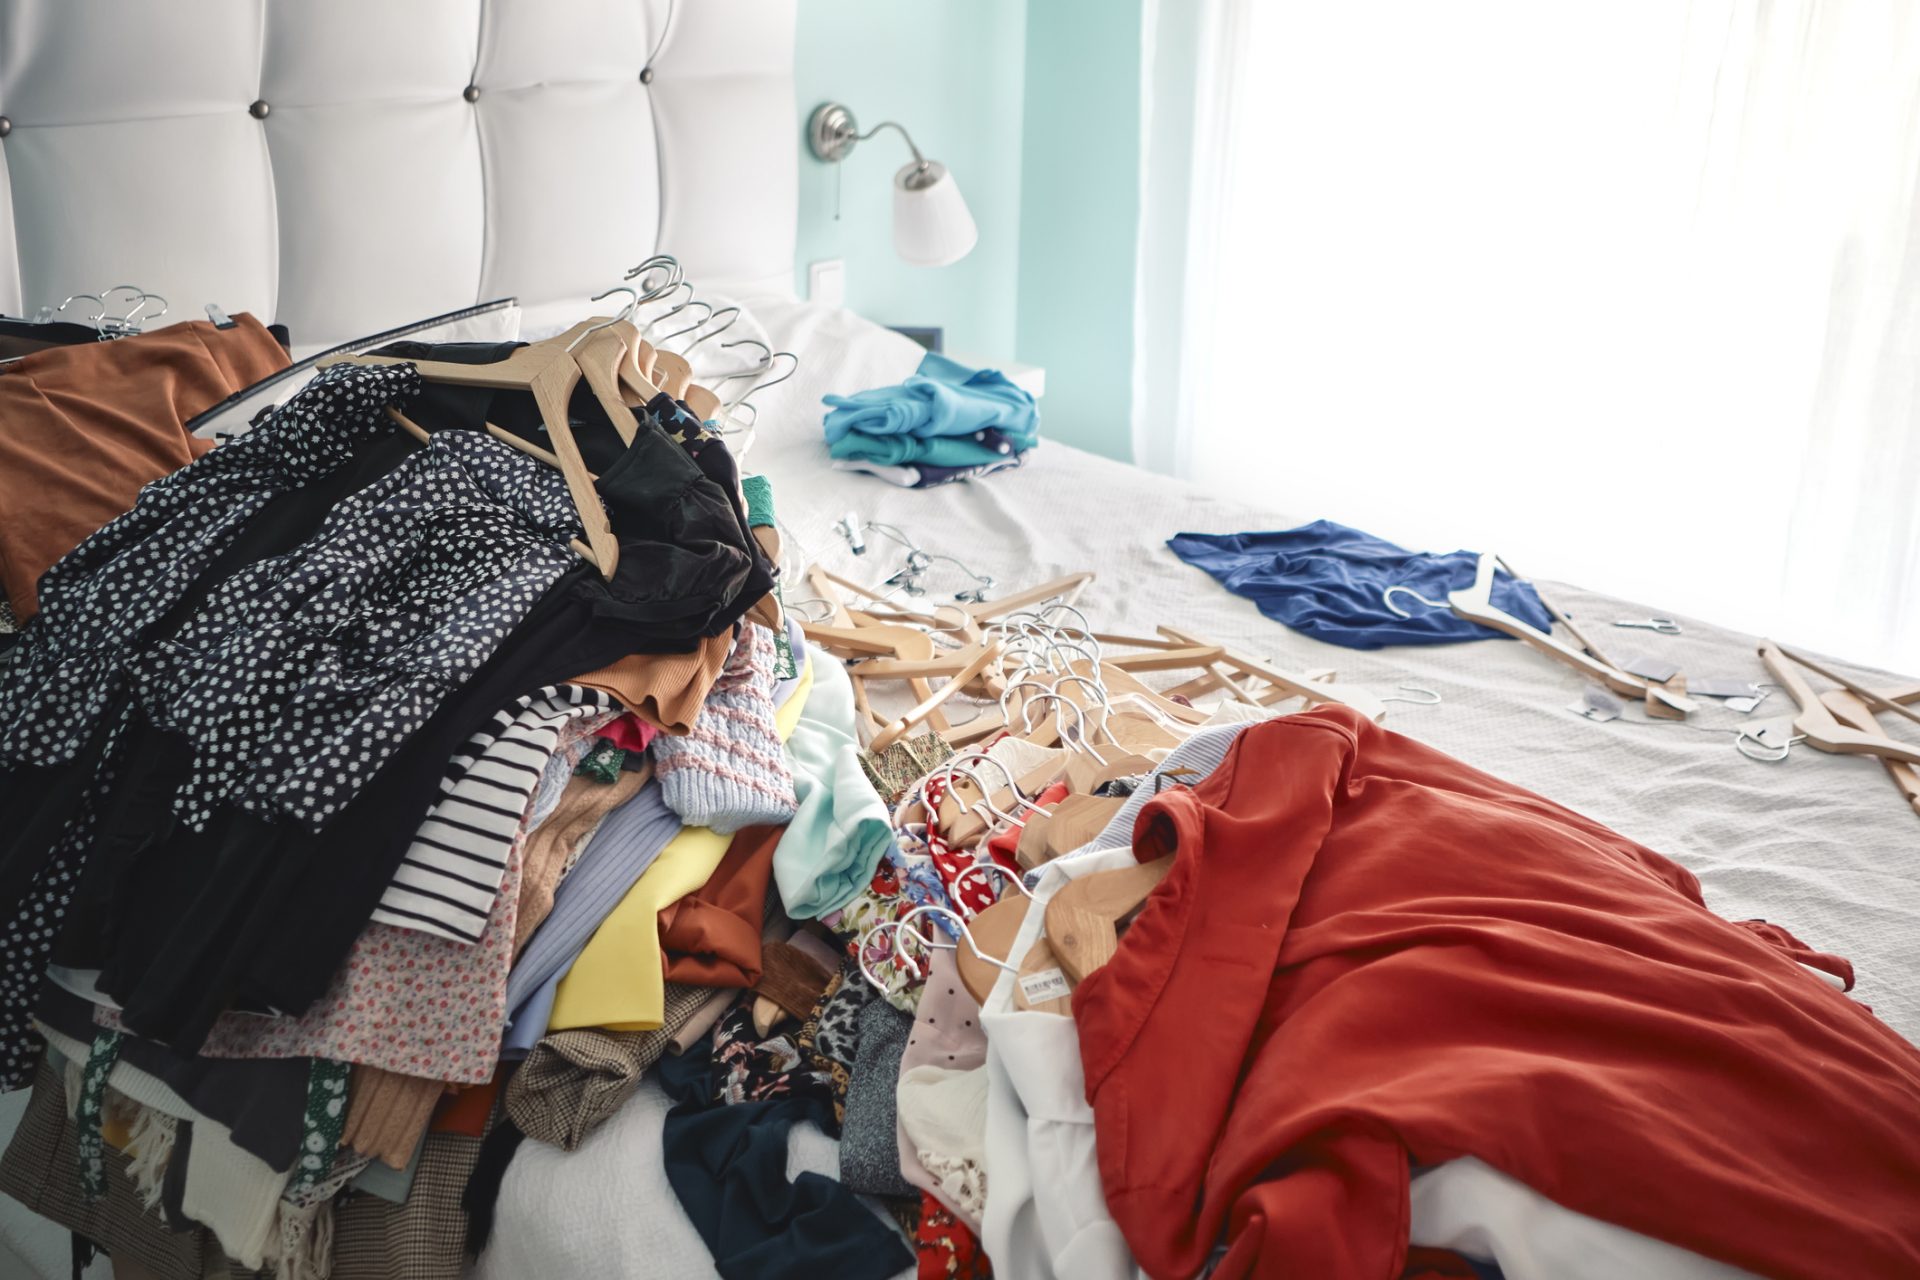 The Marie Kondo method: still a great way to organize your home